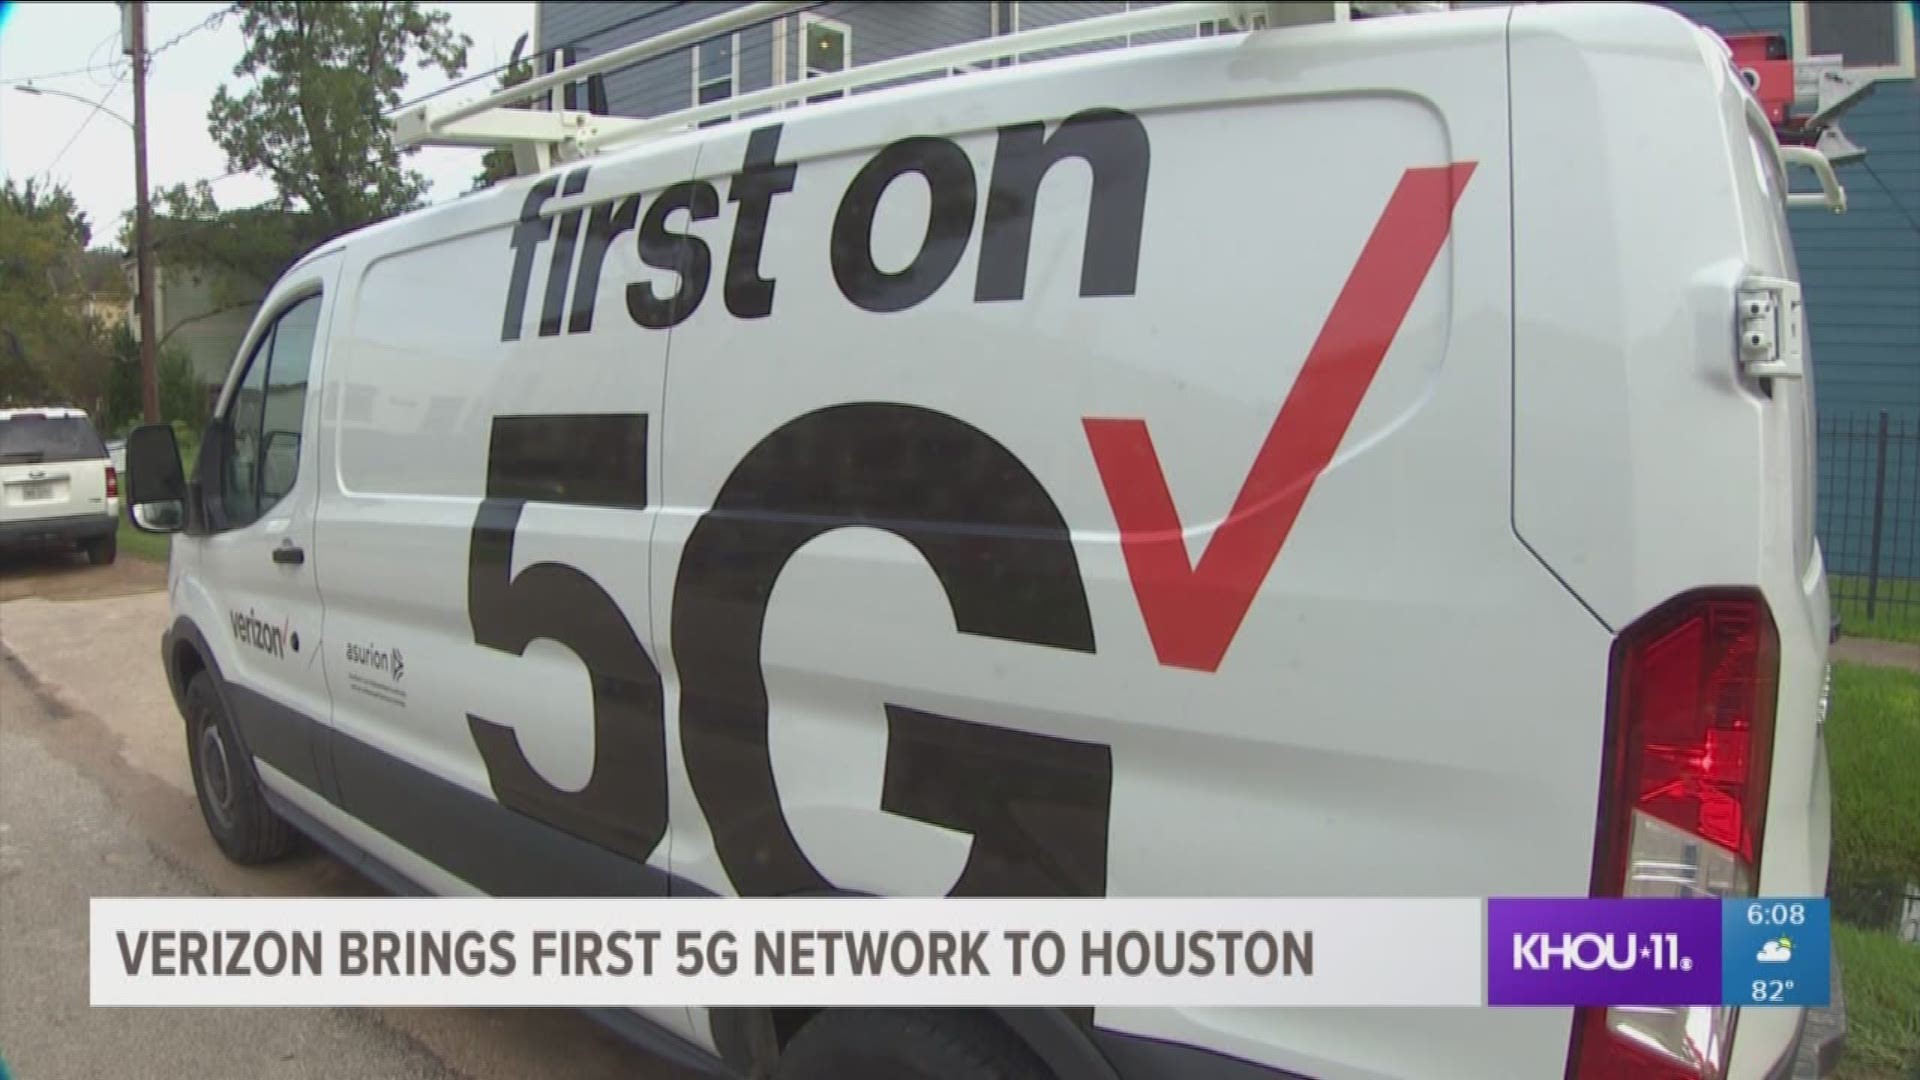 Houston is now home to cutting edge technology. Verizon installed the world's first 5G network in Houston Monday.